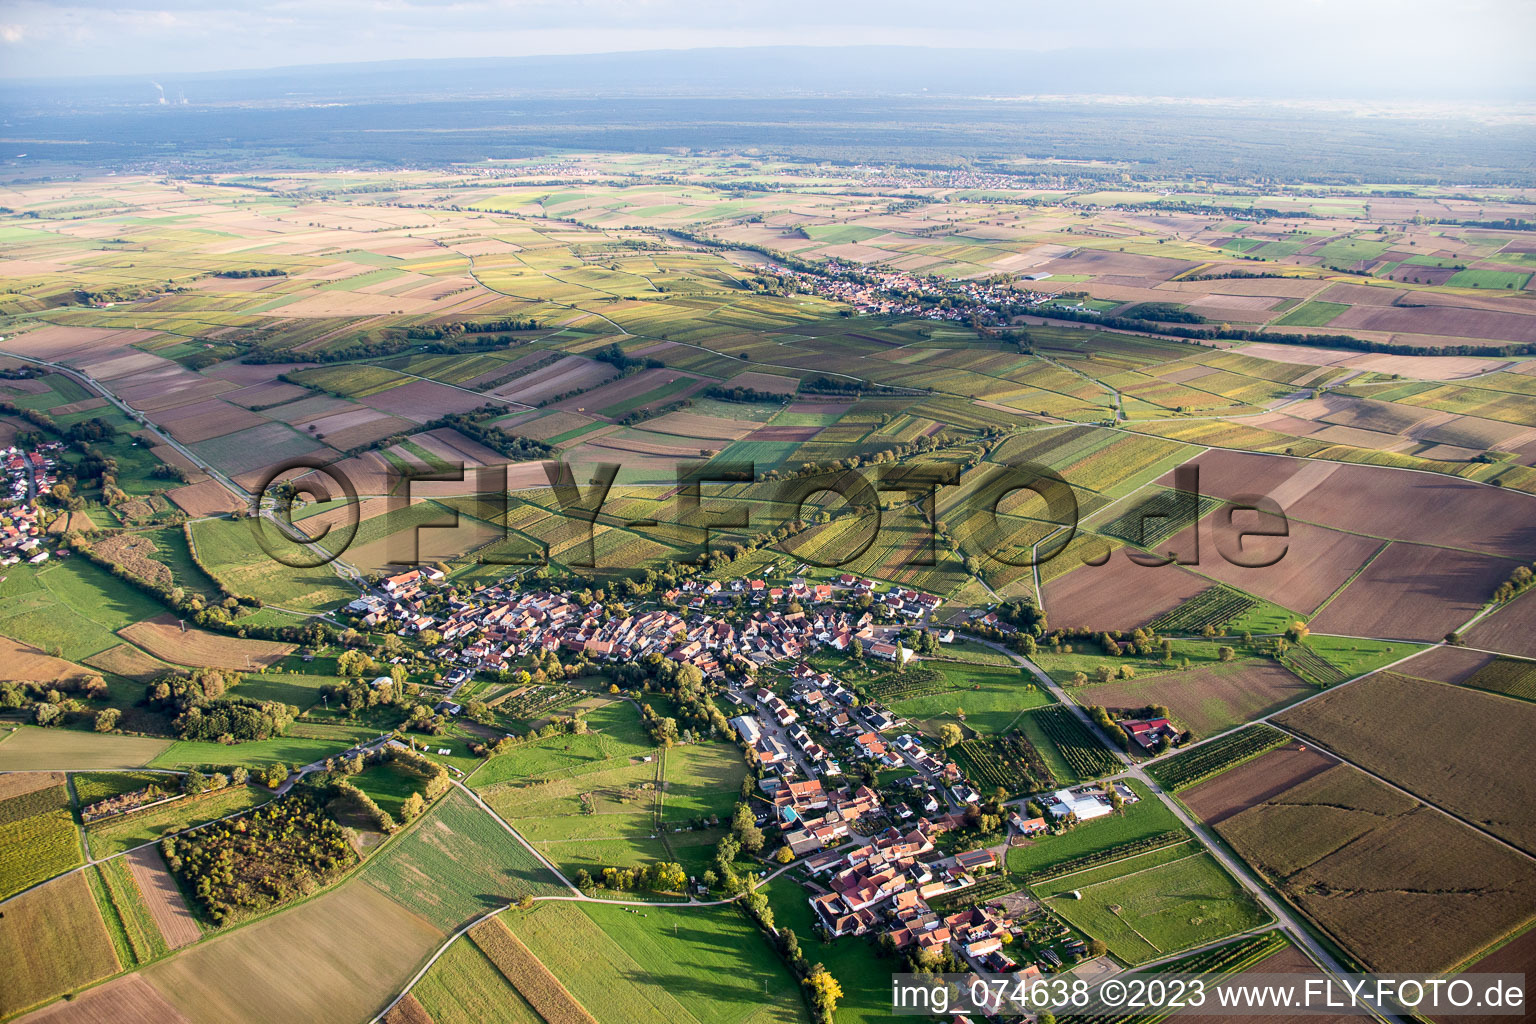 Aerial view of Oberhausen in the state Rhineland-Palatinate, Germany